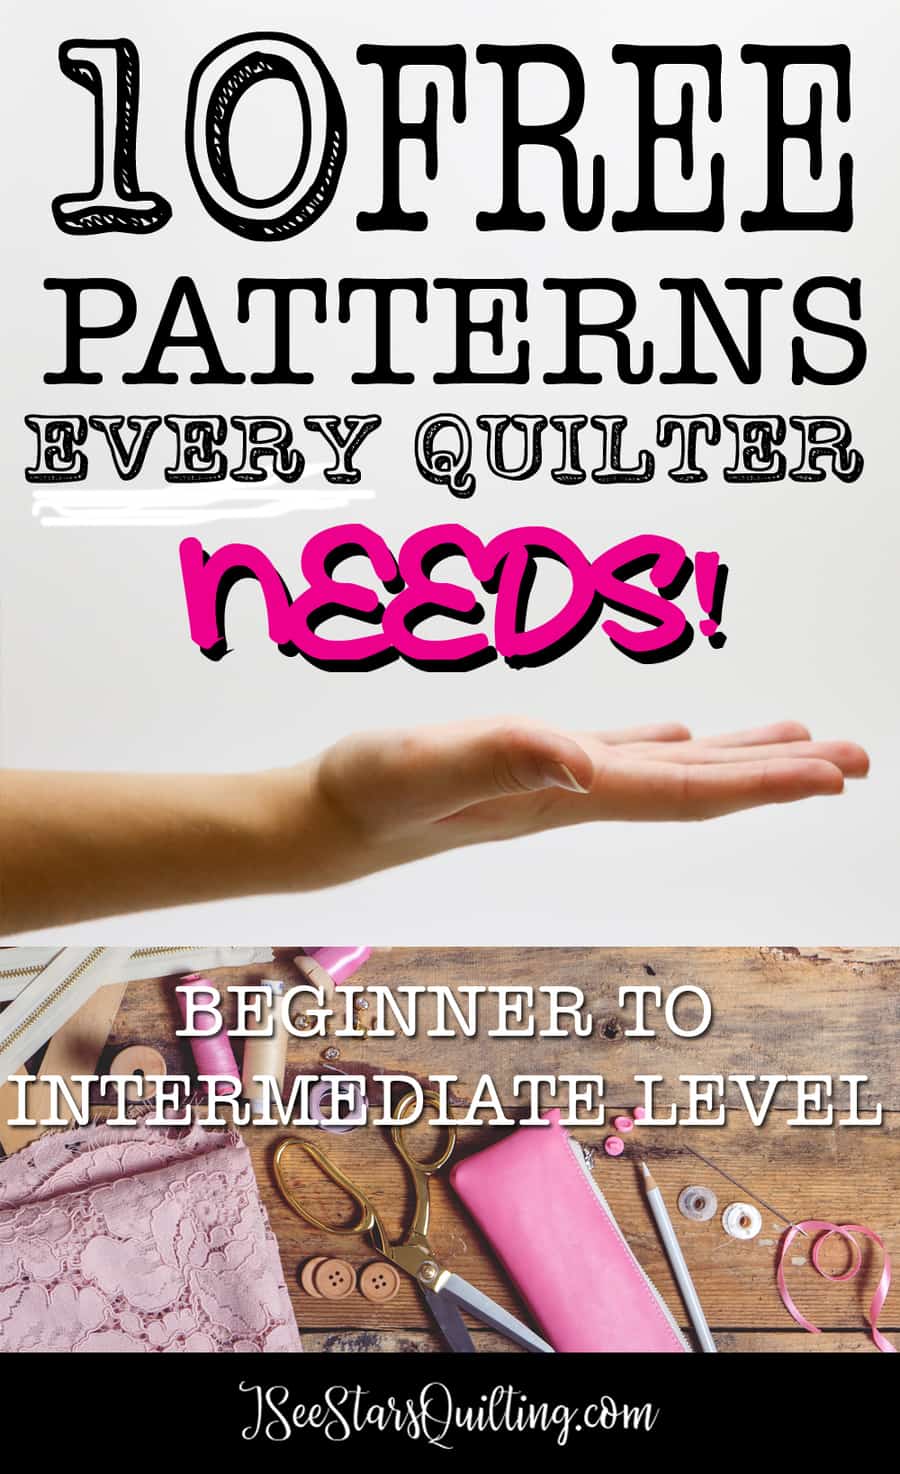 These are the 10 FREE patterns that every quilter needs to have in their arsenal of patterns for when you just want a great pattern that isn't going to make you think really long and hard before quilting. I can't wait to sew each and every one of them!